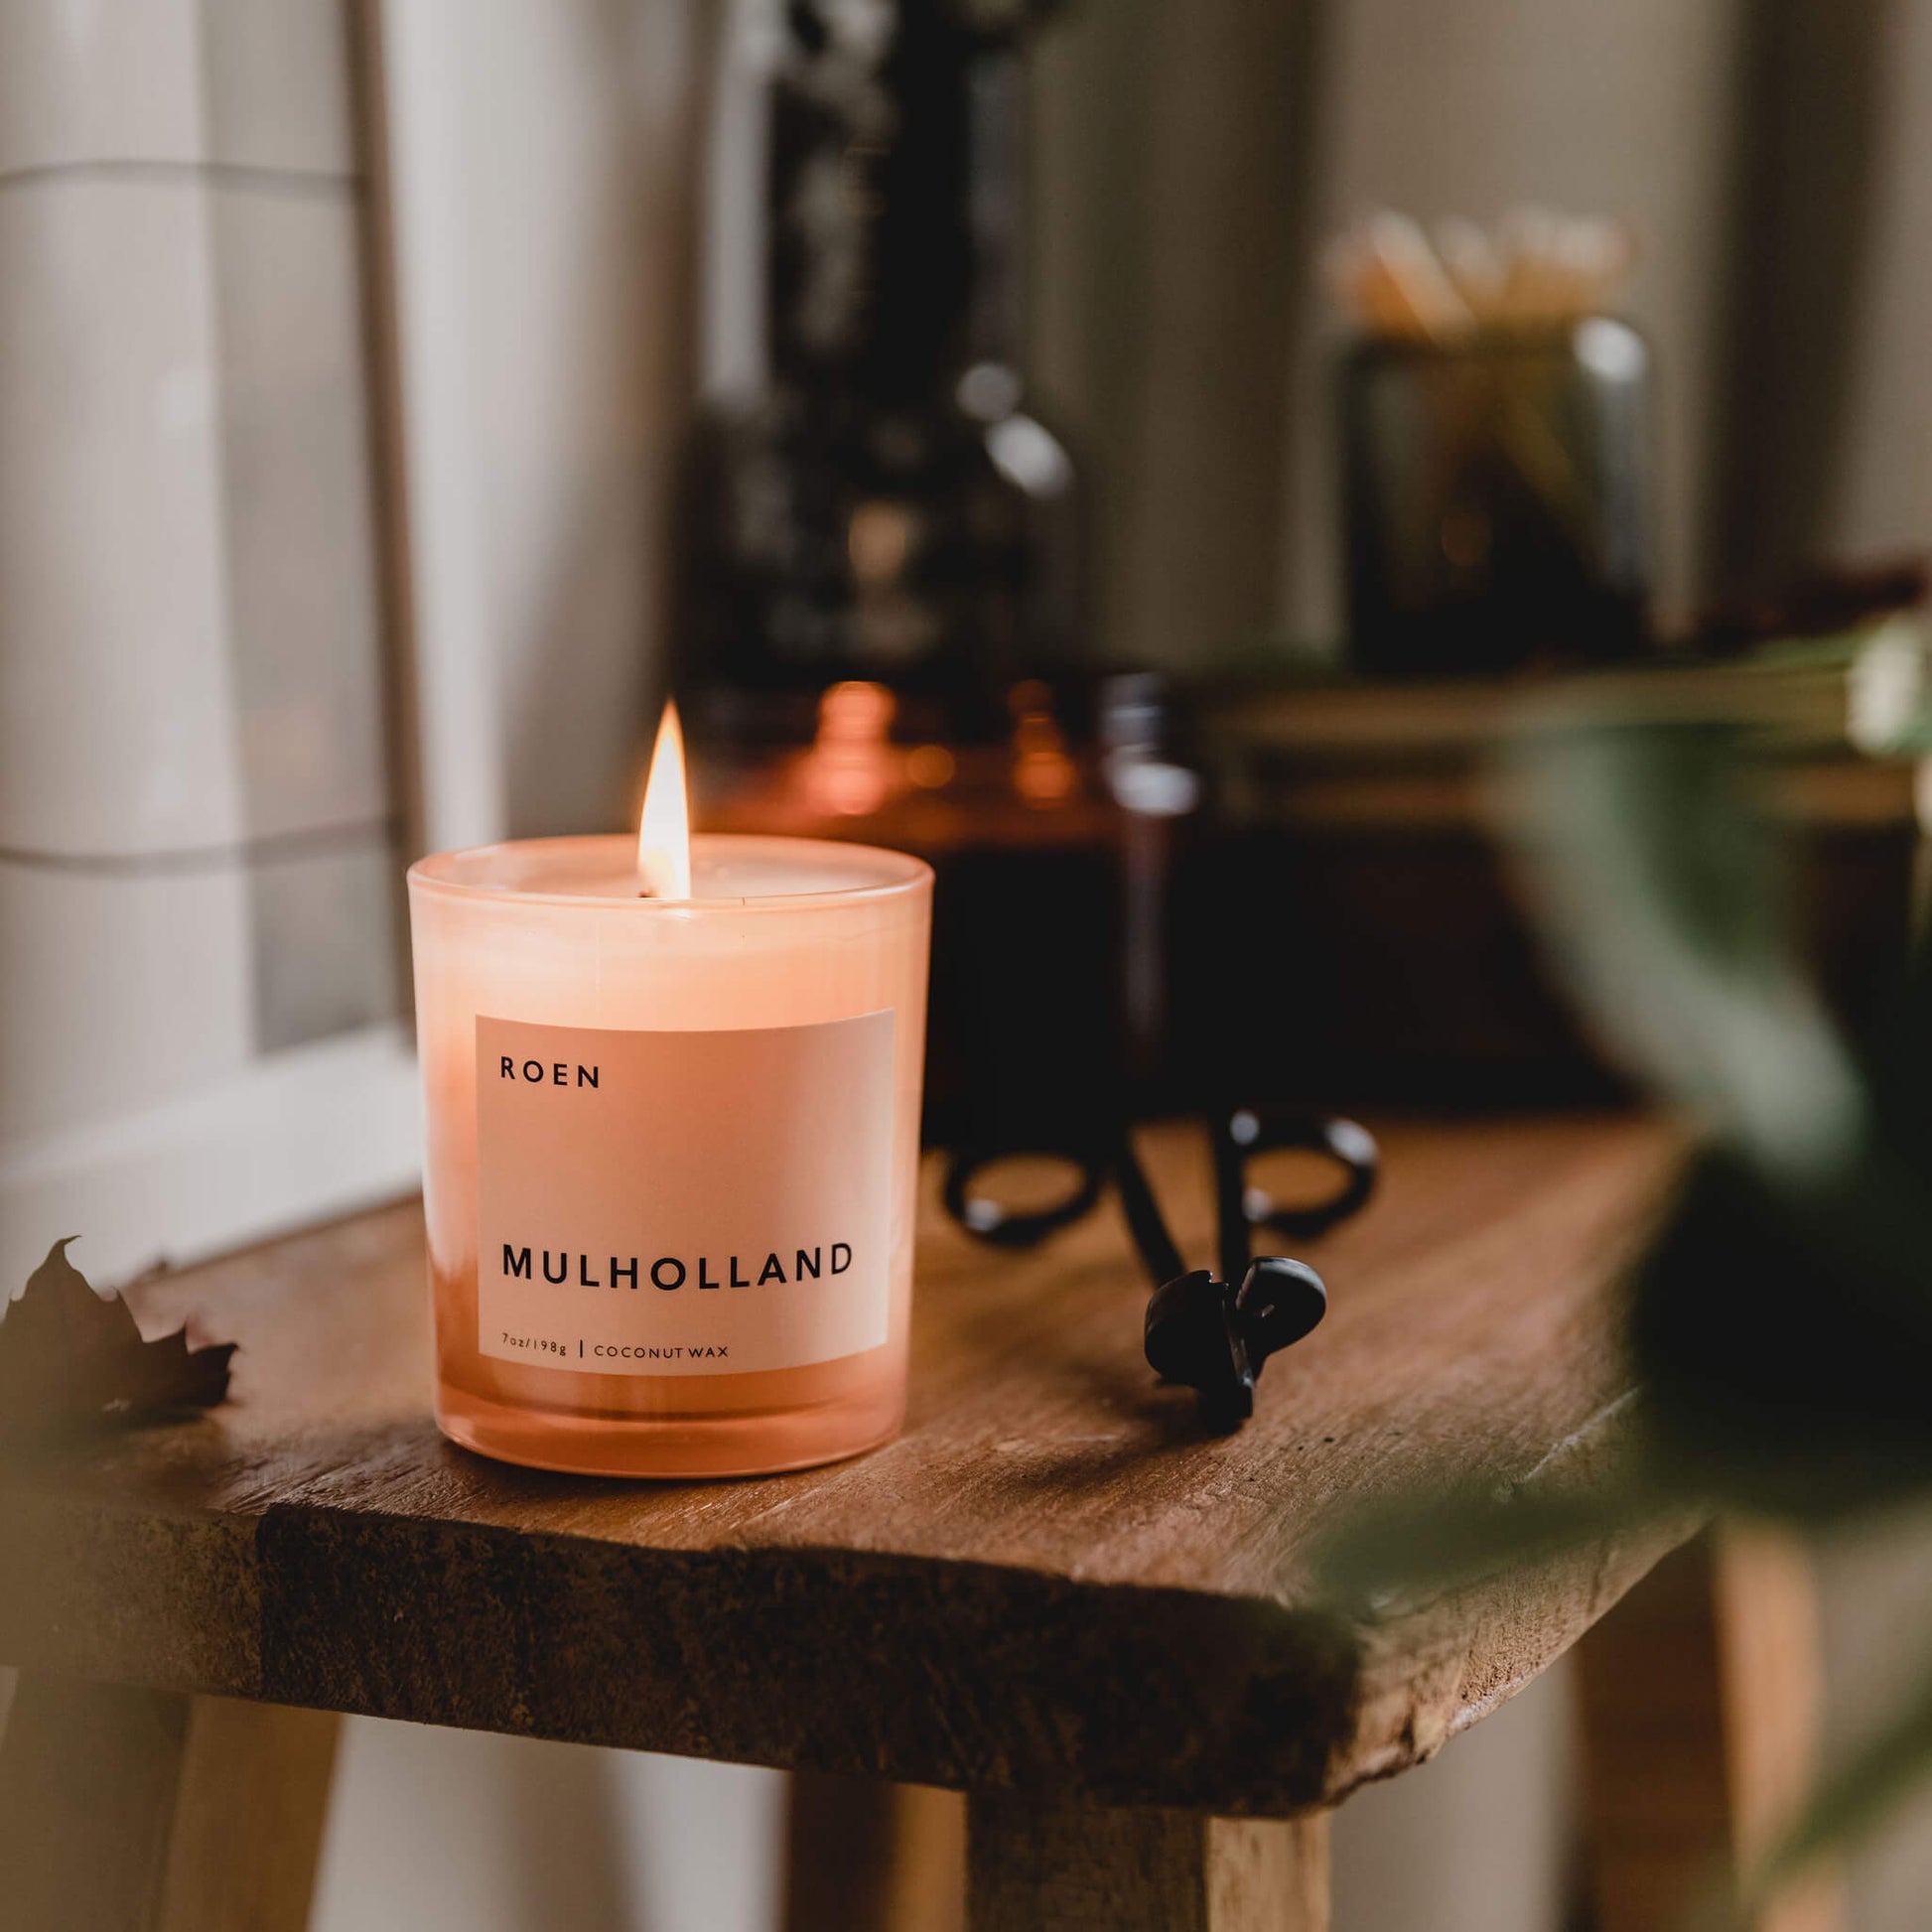 R O E N Mulholland Scented Candle - Osmology Scented Candles & Home Fragrance